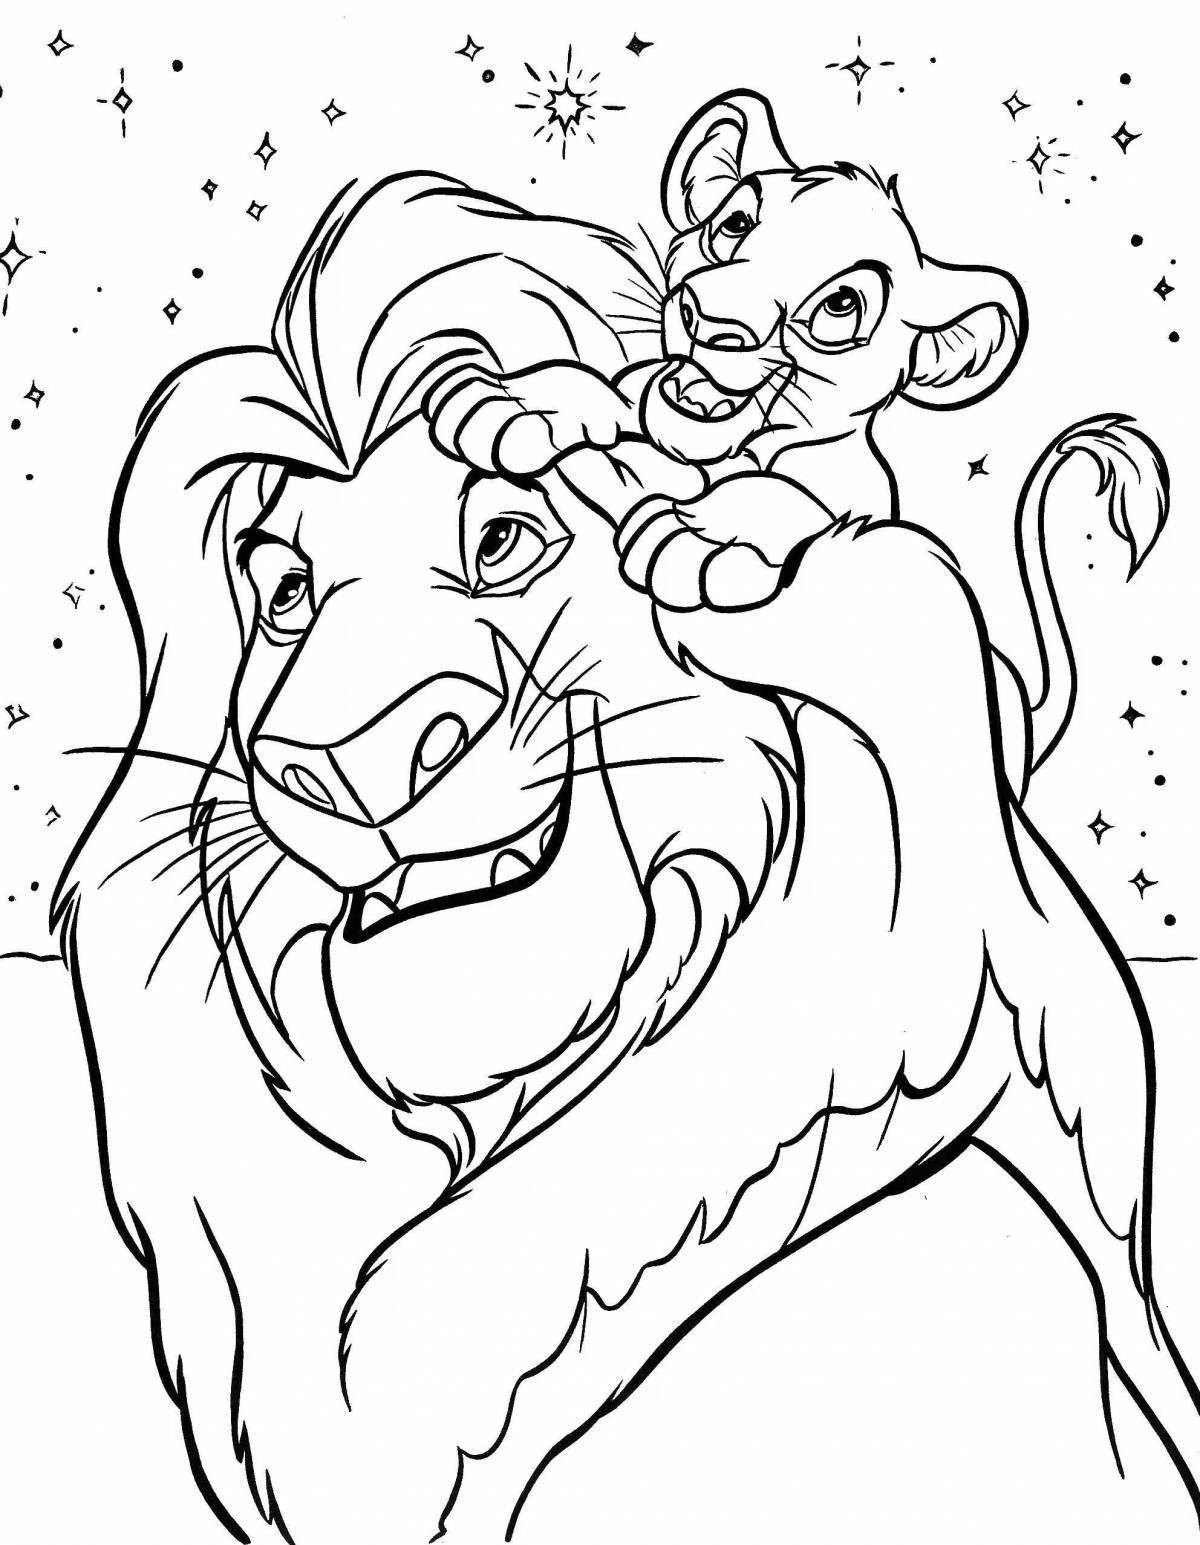 Crazy colors coloring pages for cartoon kids 6-7 years old